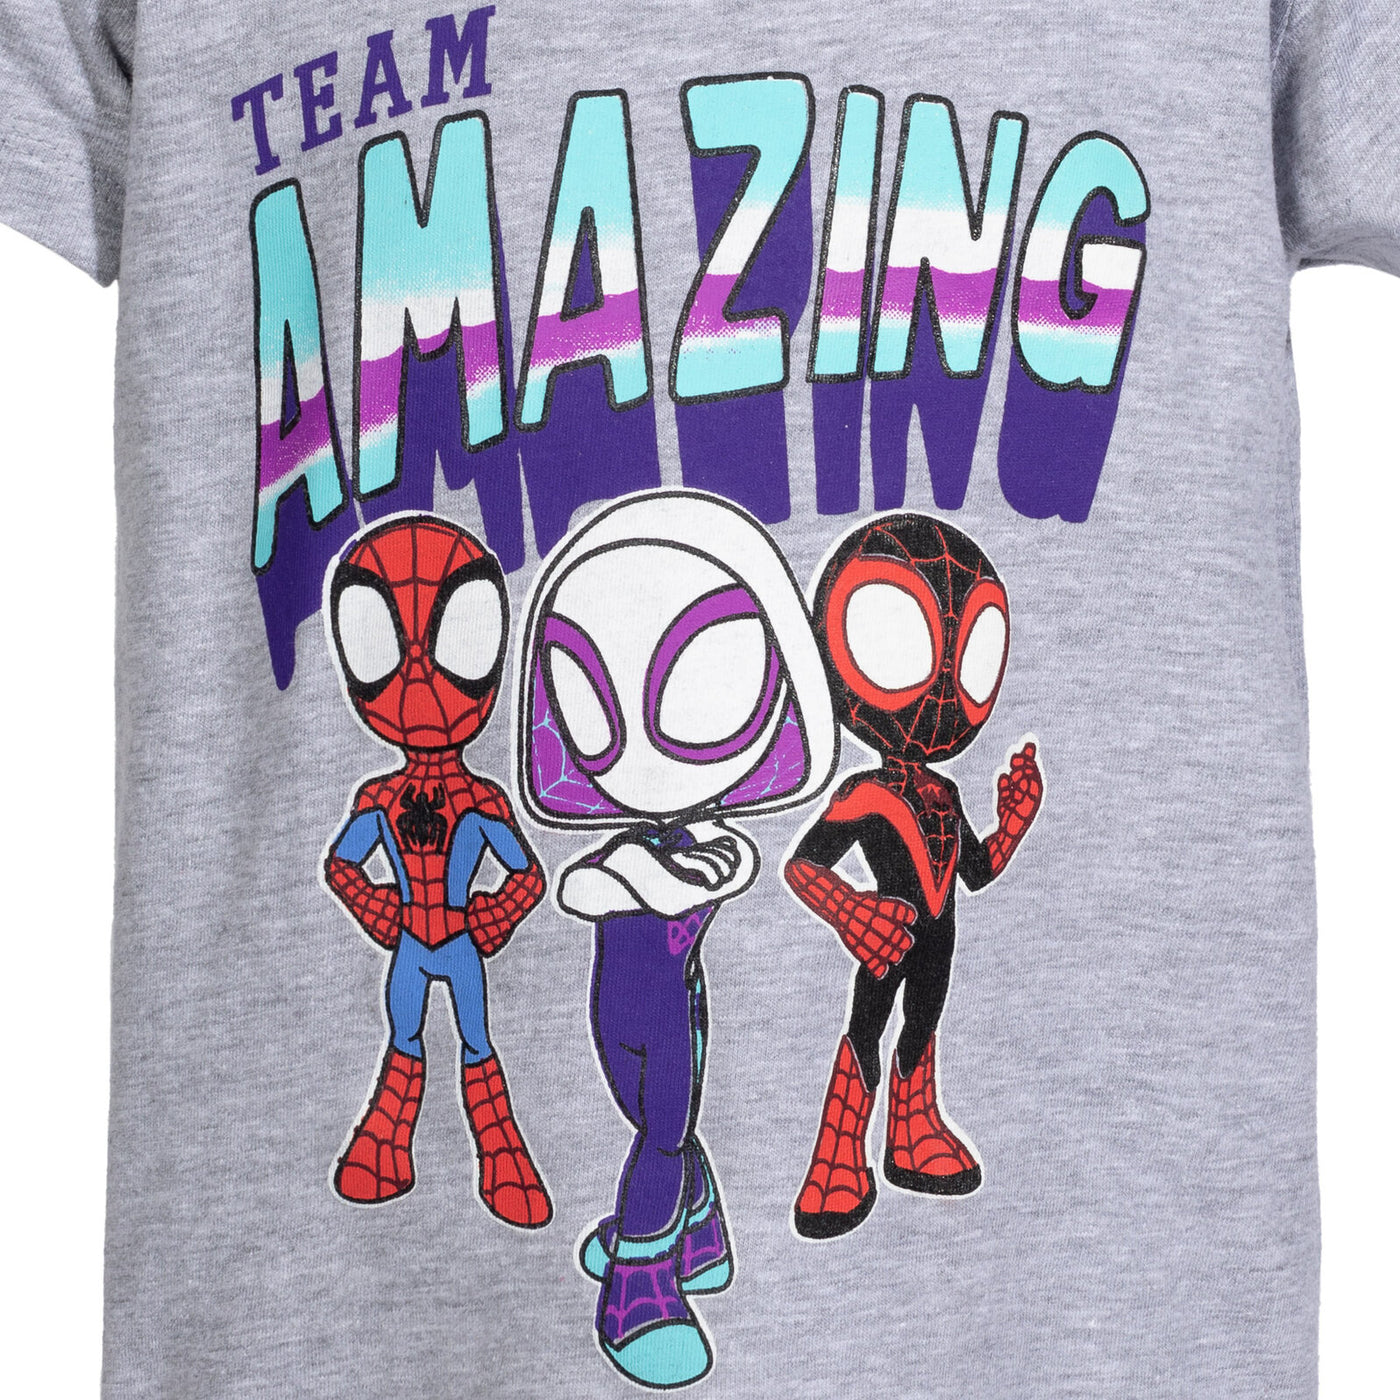 Marvel Spidey and His Amazing Friends Girls 2 Pack T-Shirts Toddler to Little Kid